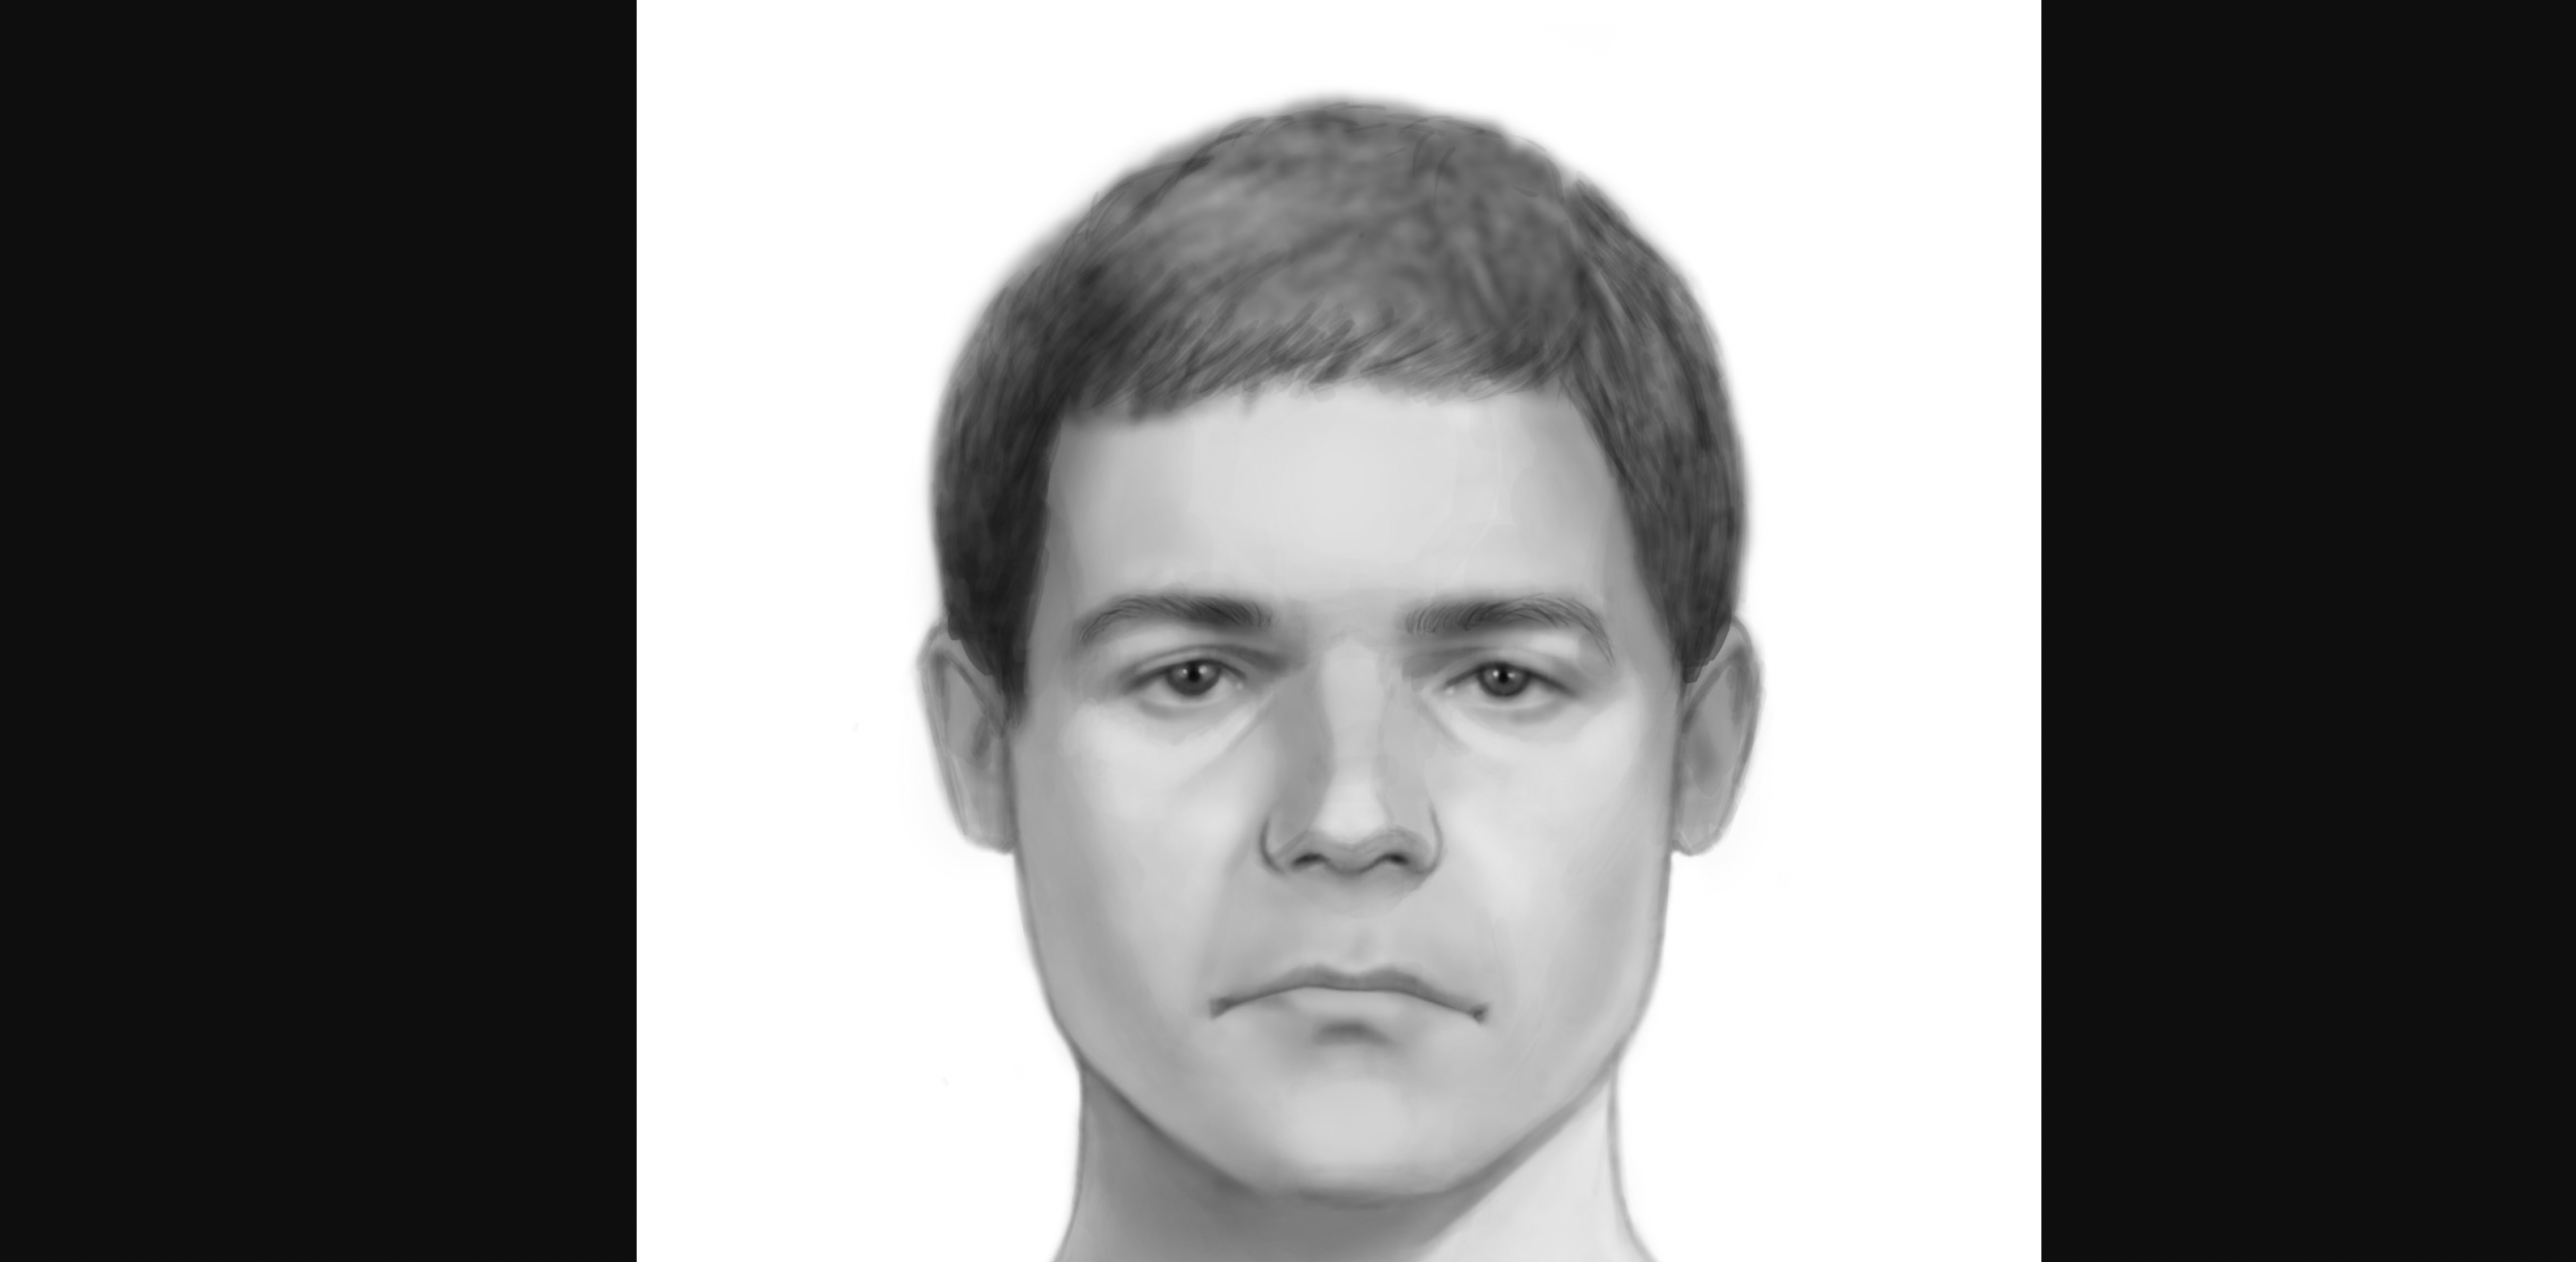 Woman reports naked intruder grabbed her in shower, police seek tips from public